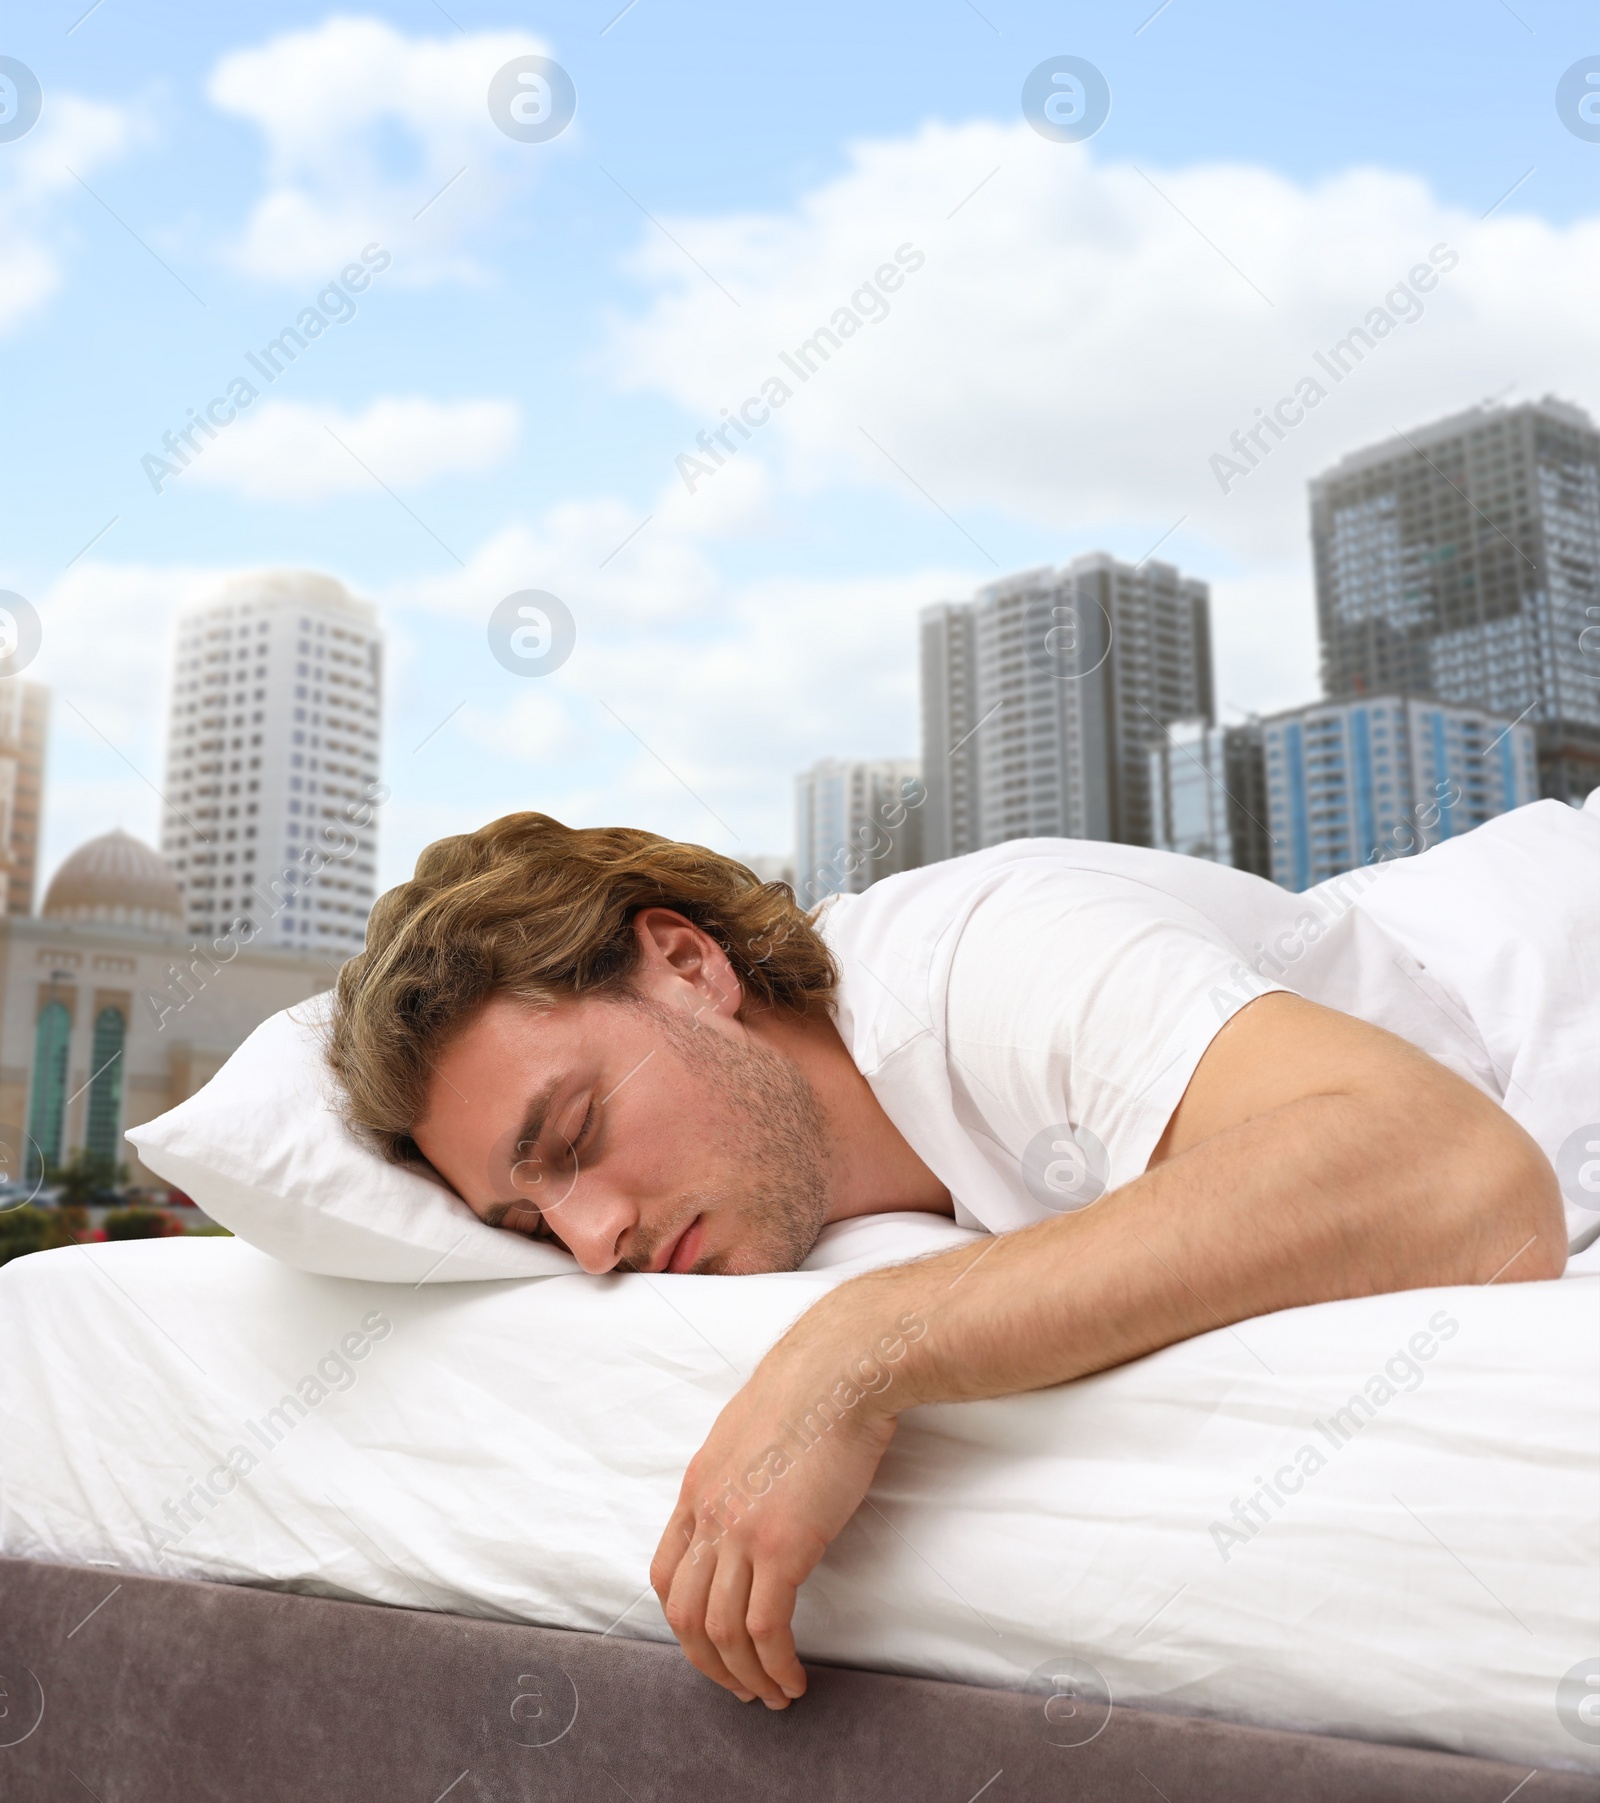 Image of Man sleeping in bed and beautiful view of cityscape on background. Good sleep despite of urban bustle